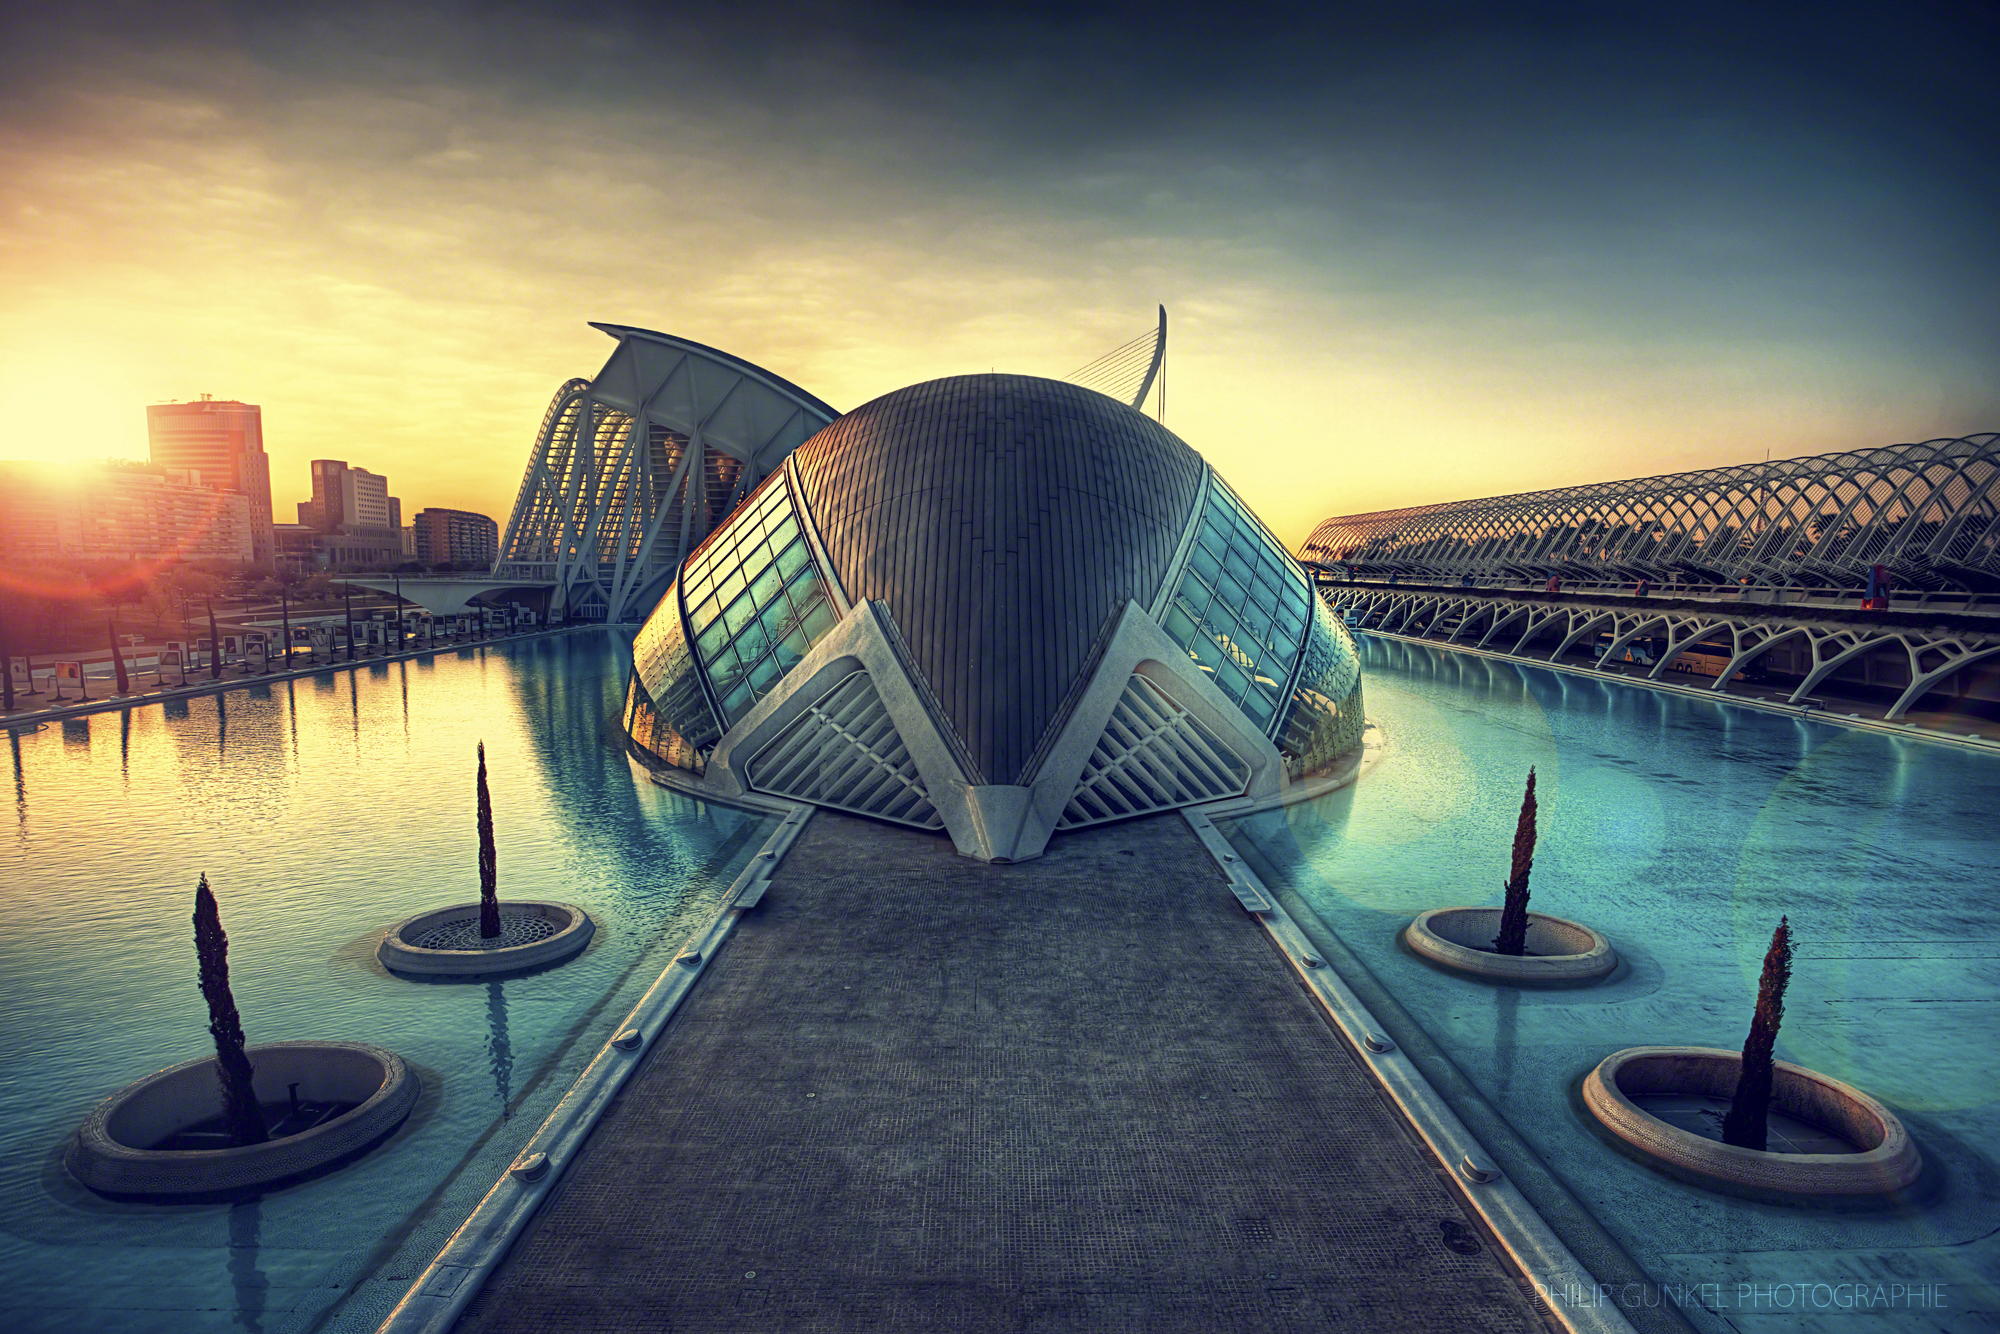 City of Arts and Sciences I